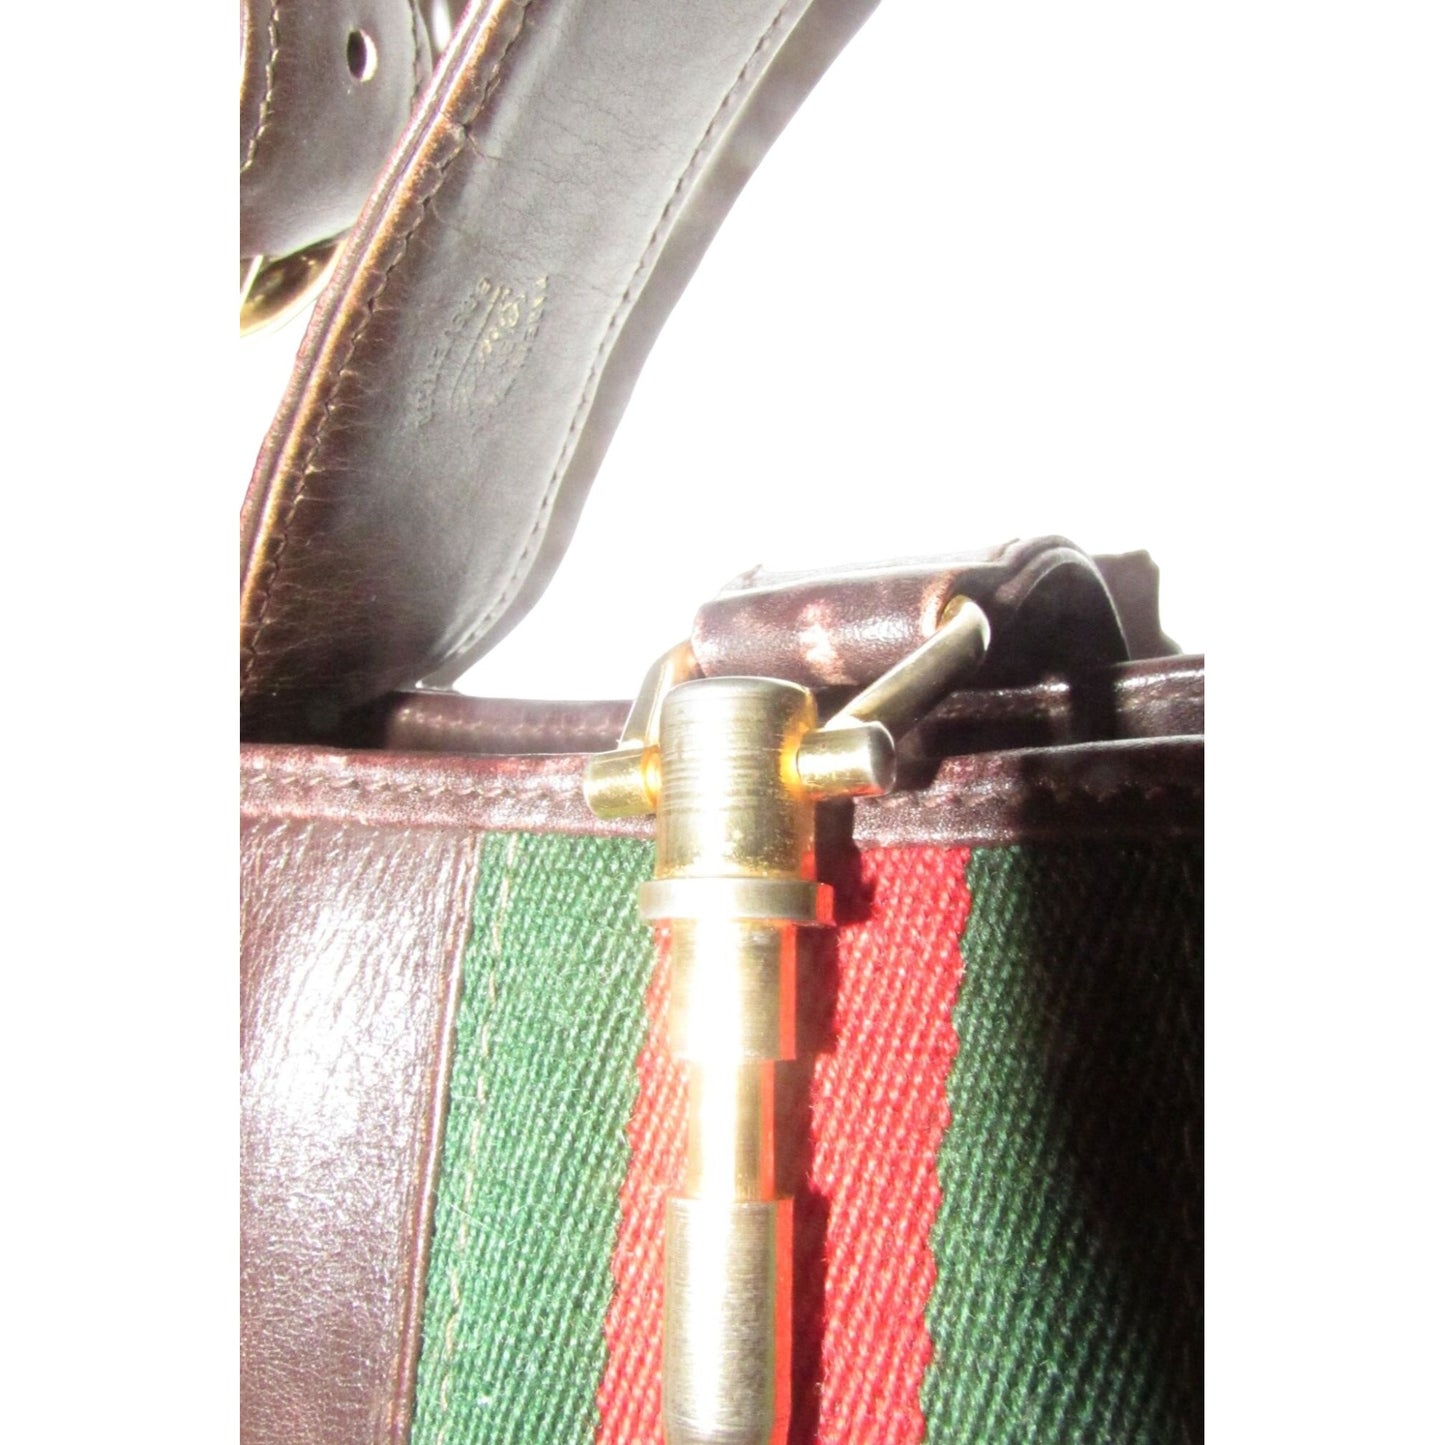 Rare, vintage, Gucci, 1961 Jackie, glossy brown leather hobo style shoulder bag with a red and green center stripe & gold piston closure